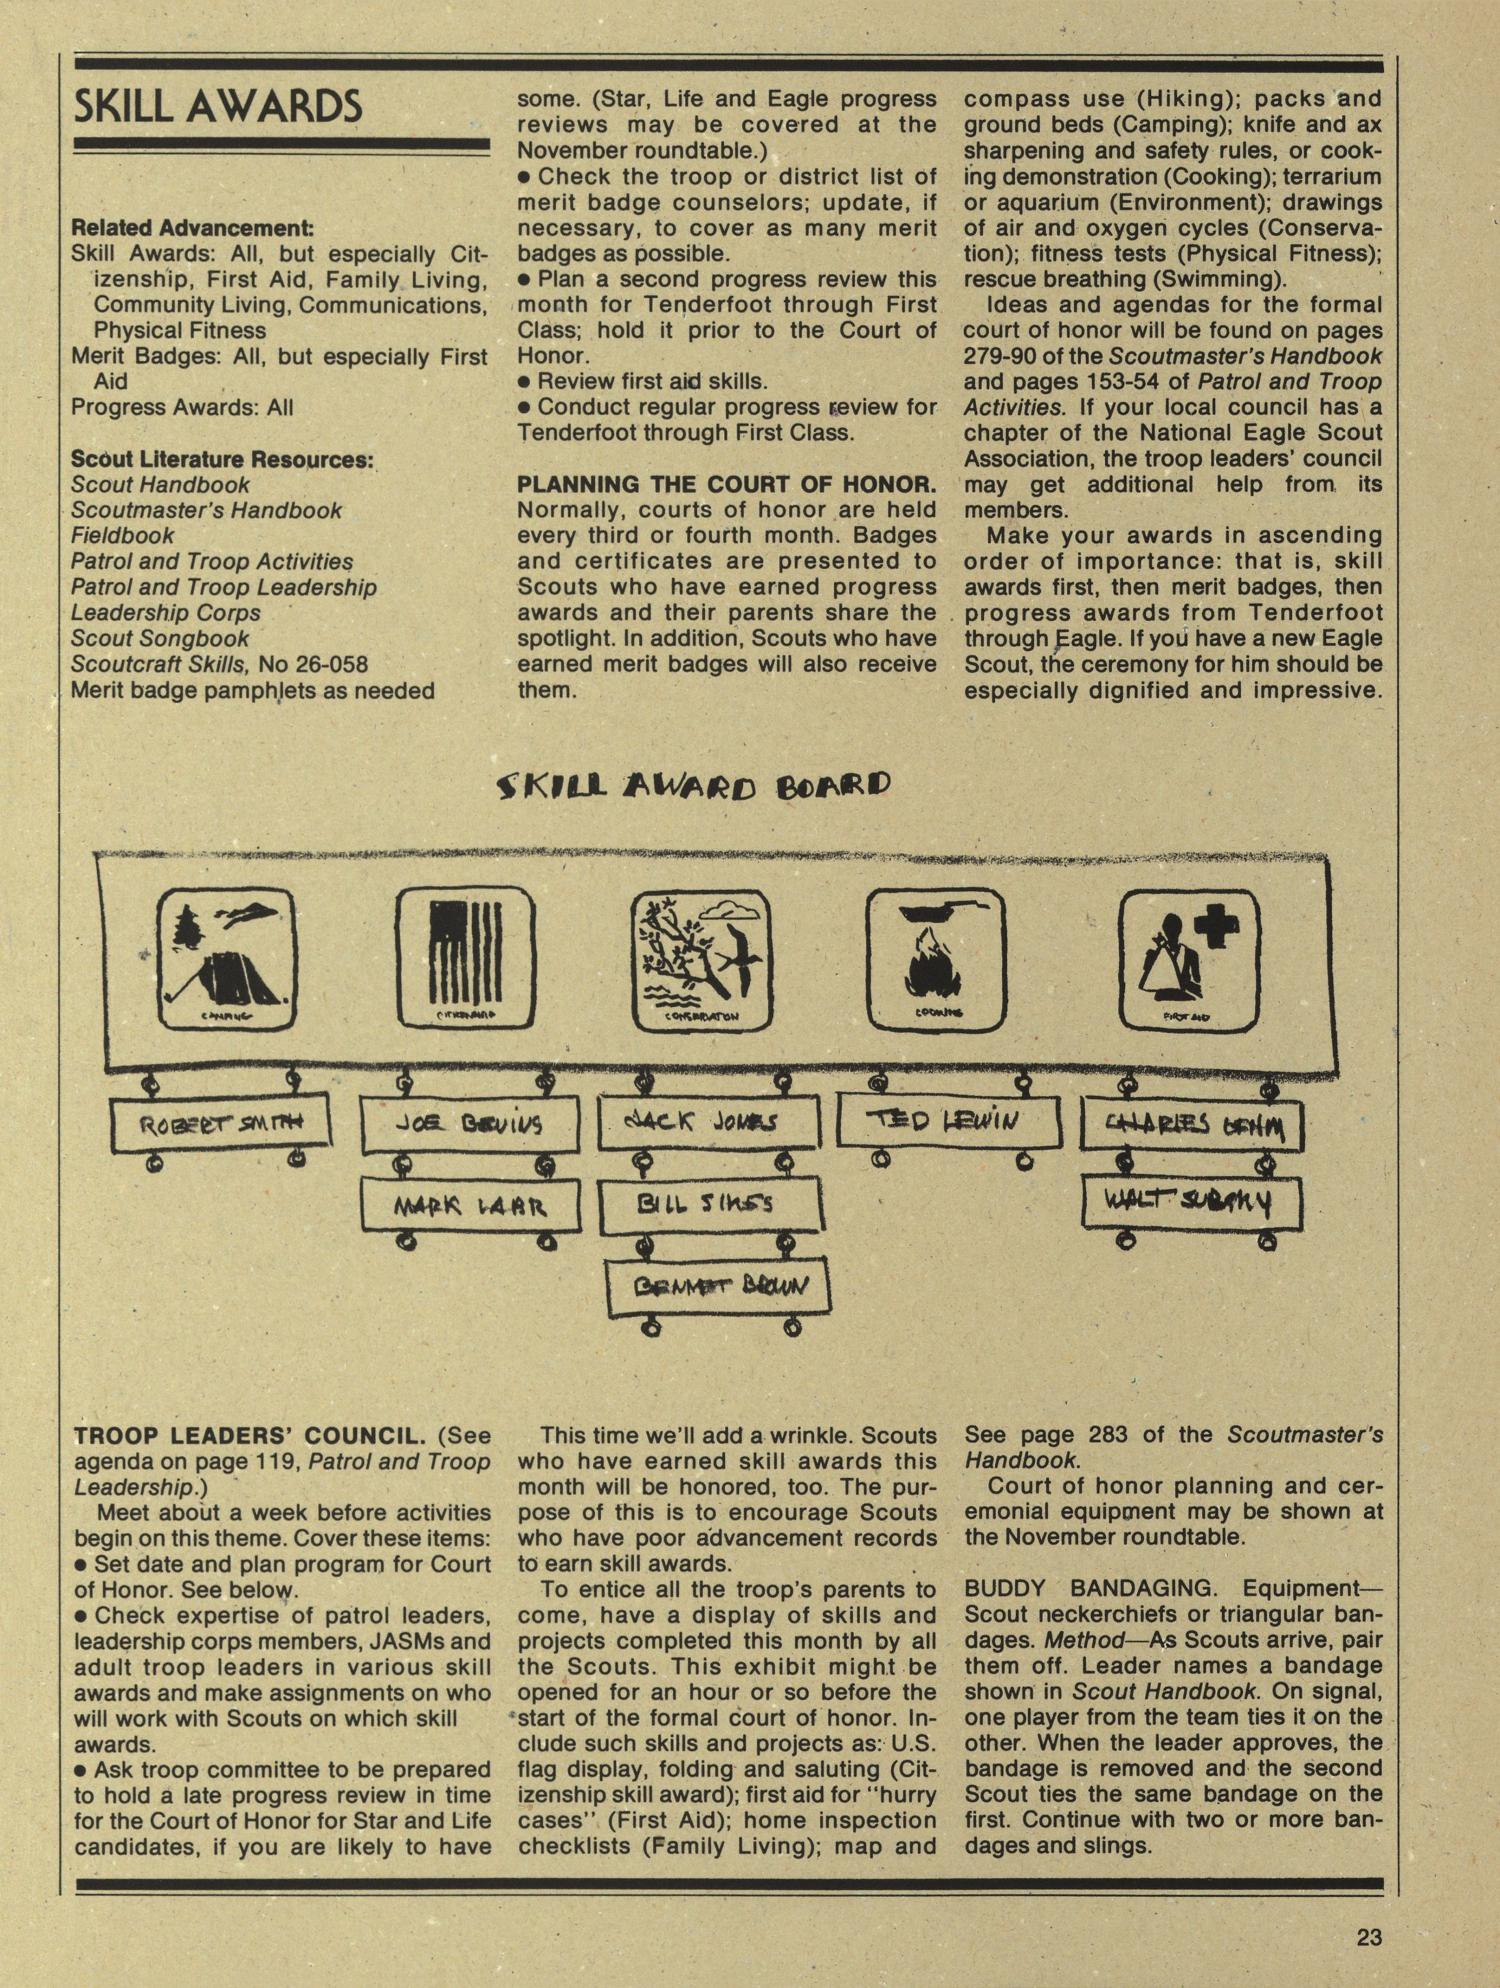 Scouting, Volume 65, Number 3, May-June 1977
                                                
                                                    23
                                                